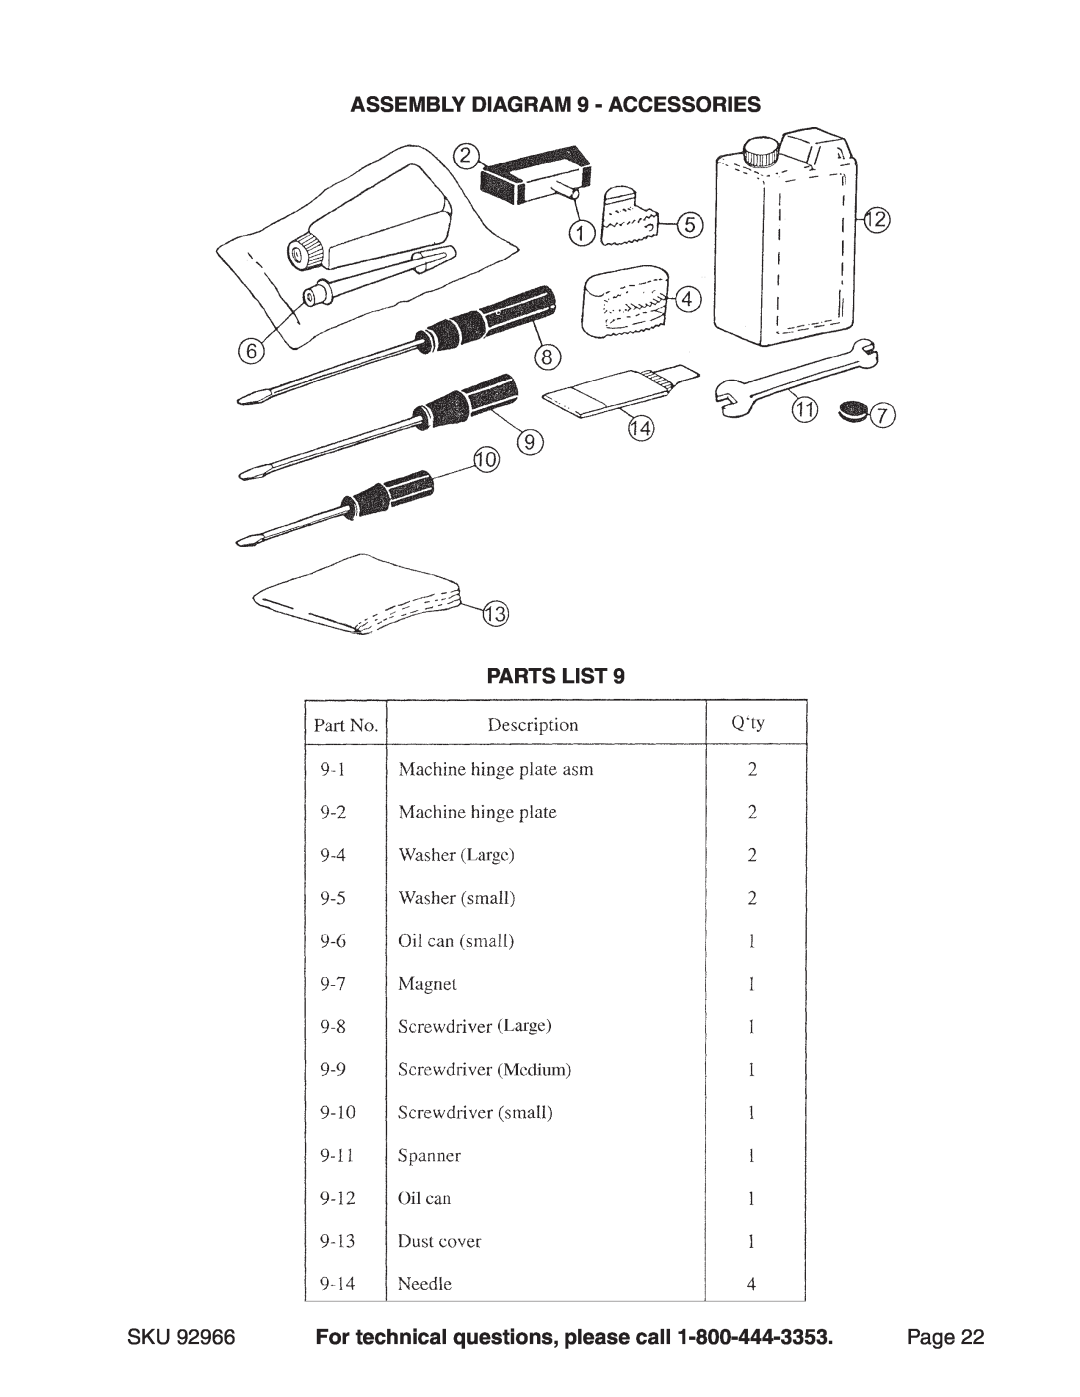 Harbor Freight Tools 92966 manual ASSEMBLY Diagram 9 - Accessories, Parts List, For technical questions, please call, Page 